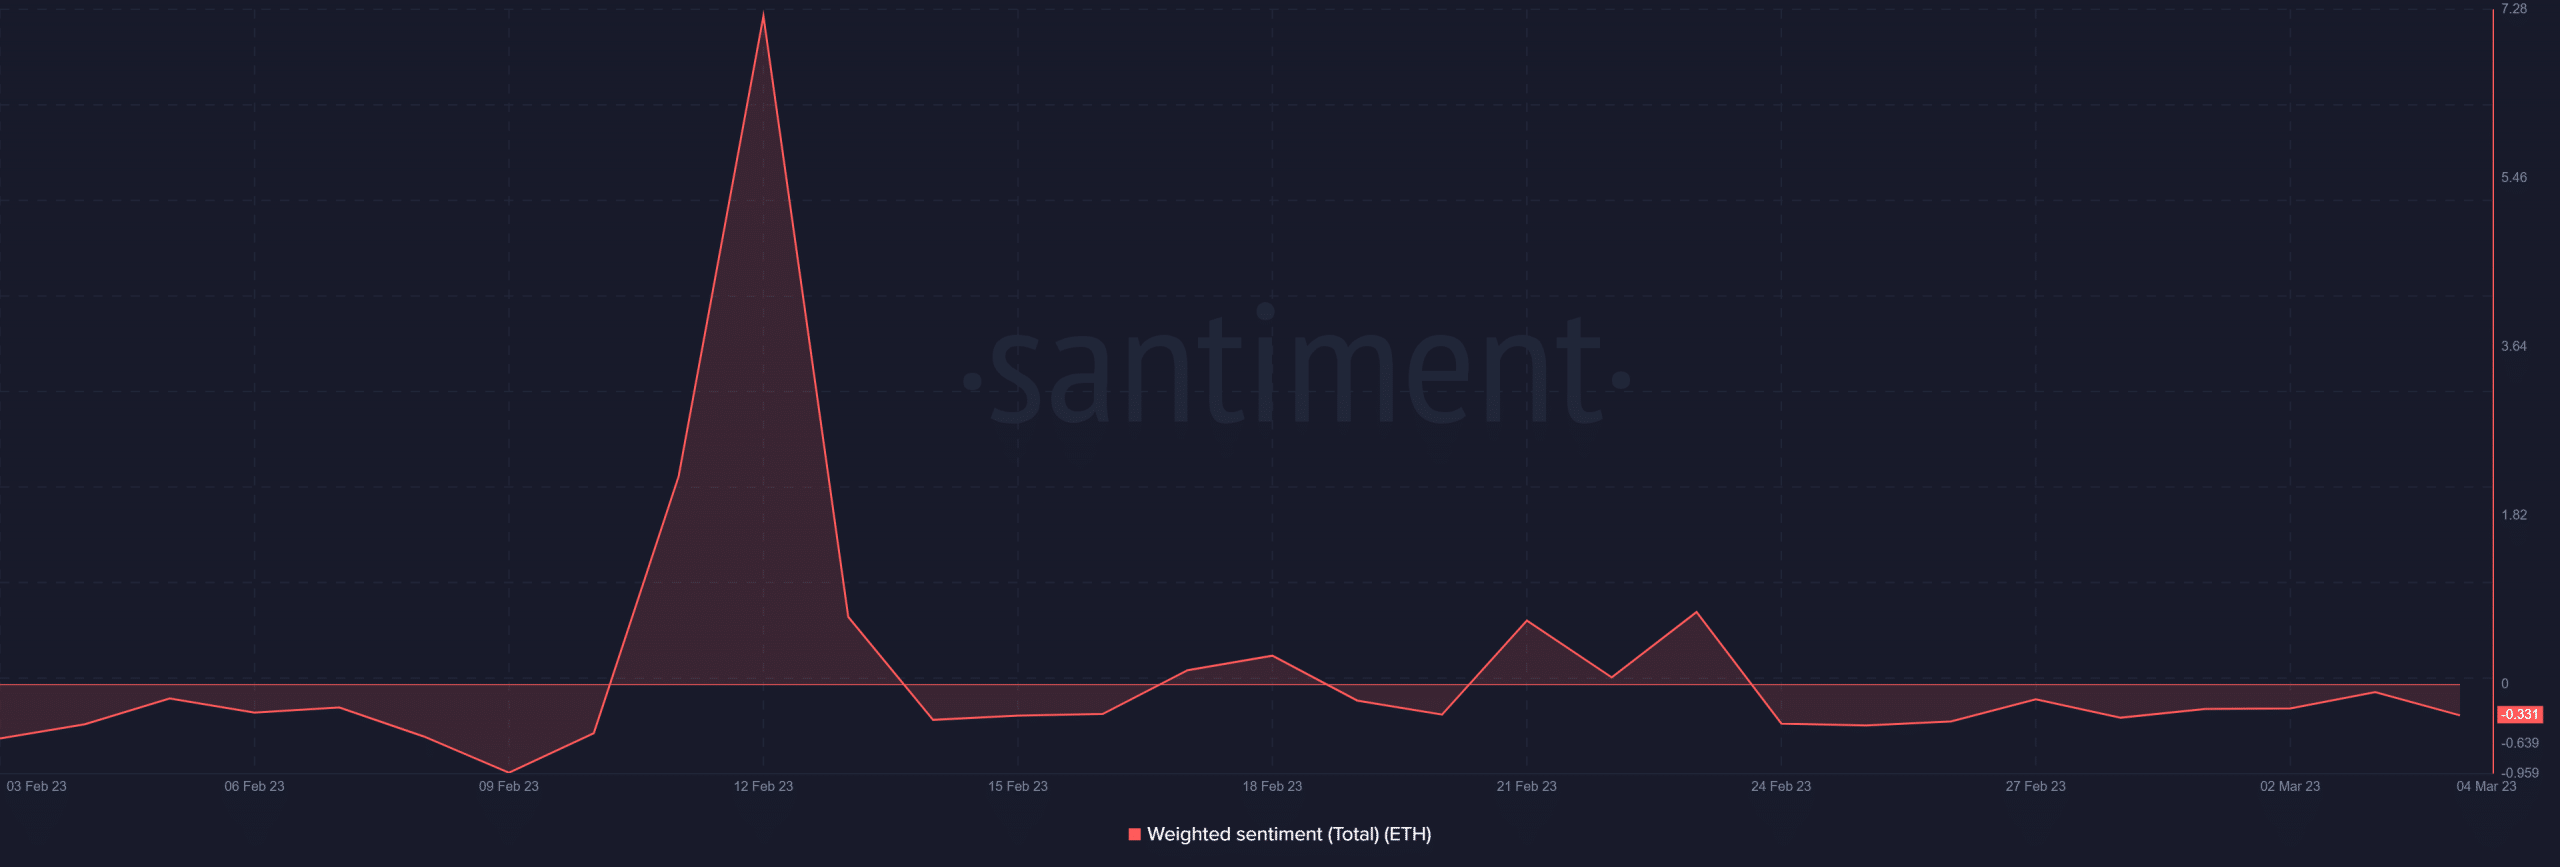 ETH weighted sentiment